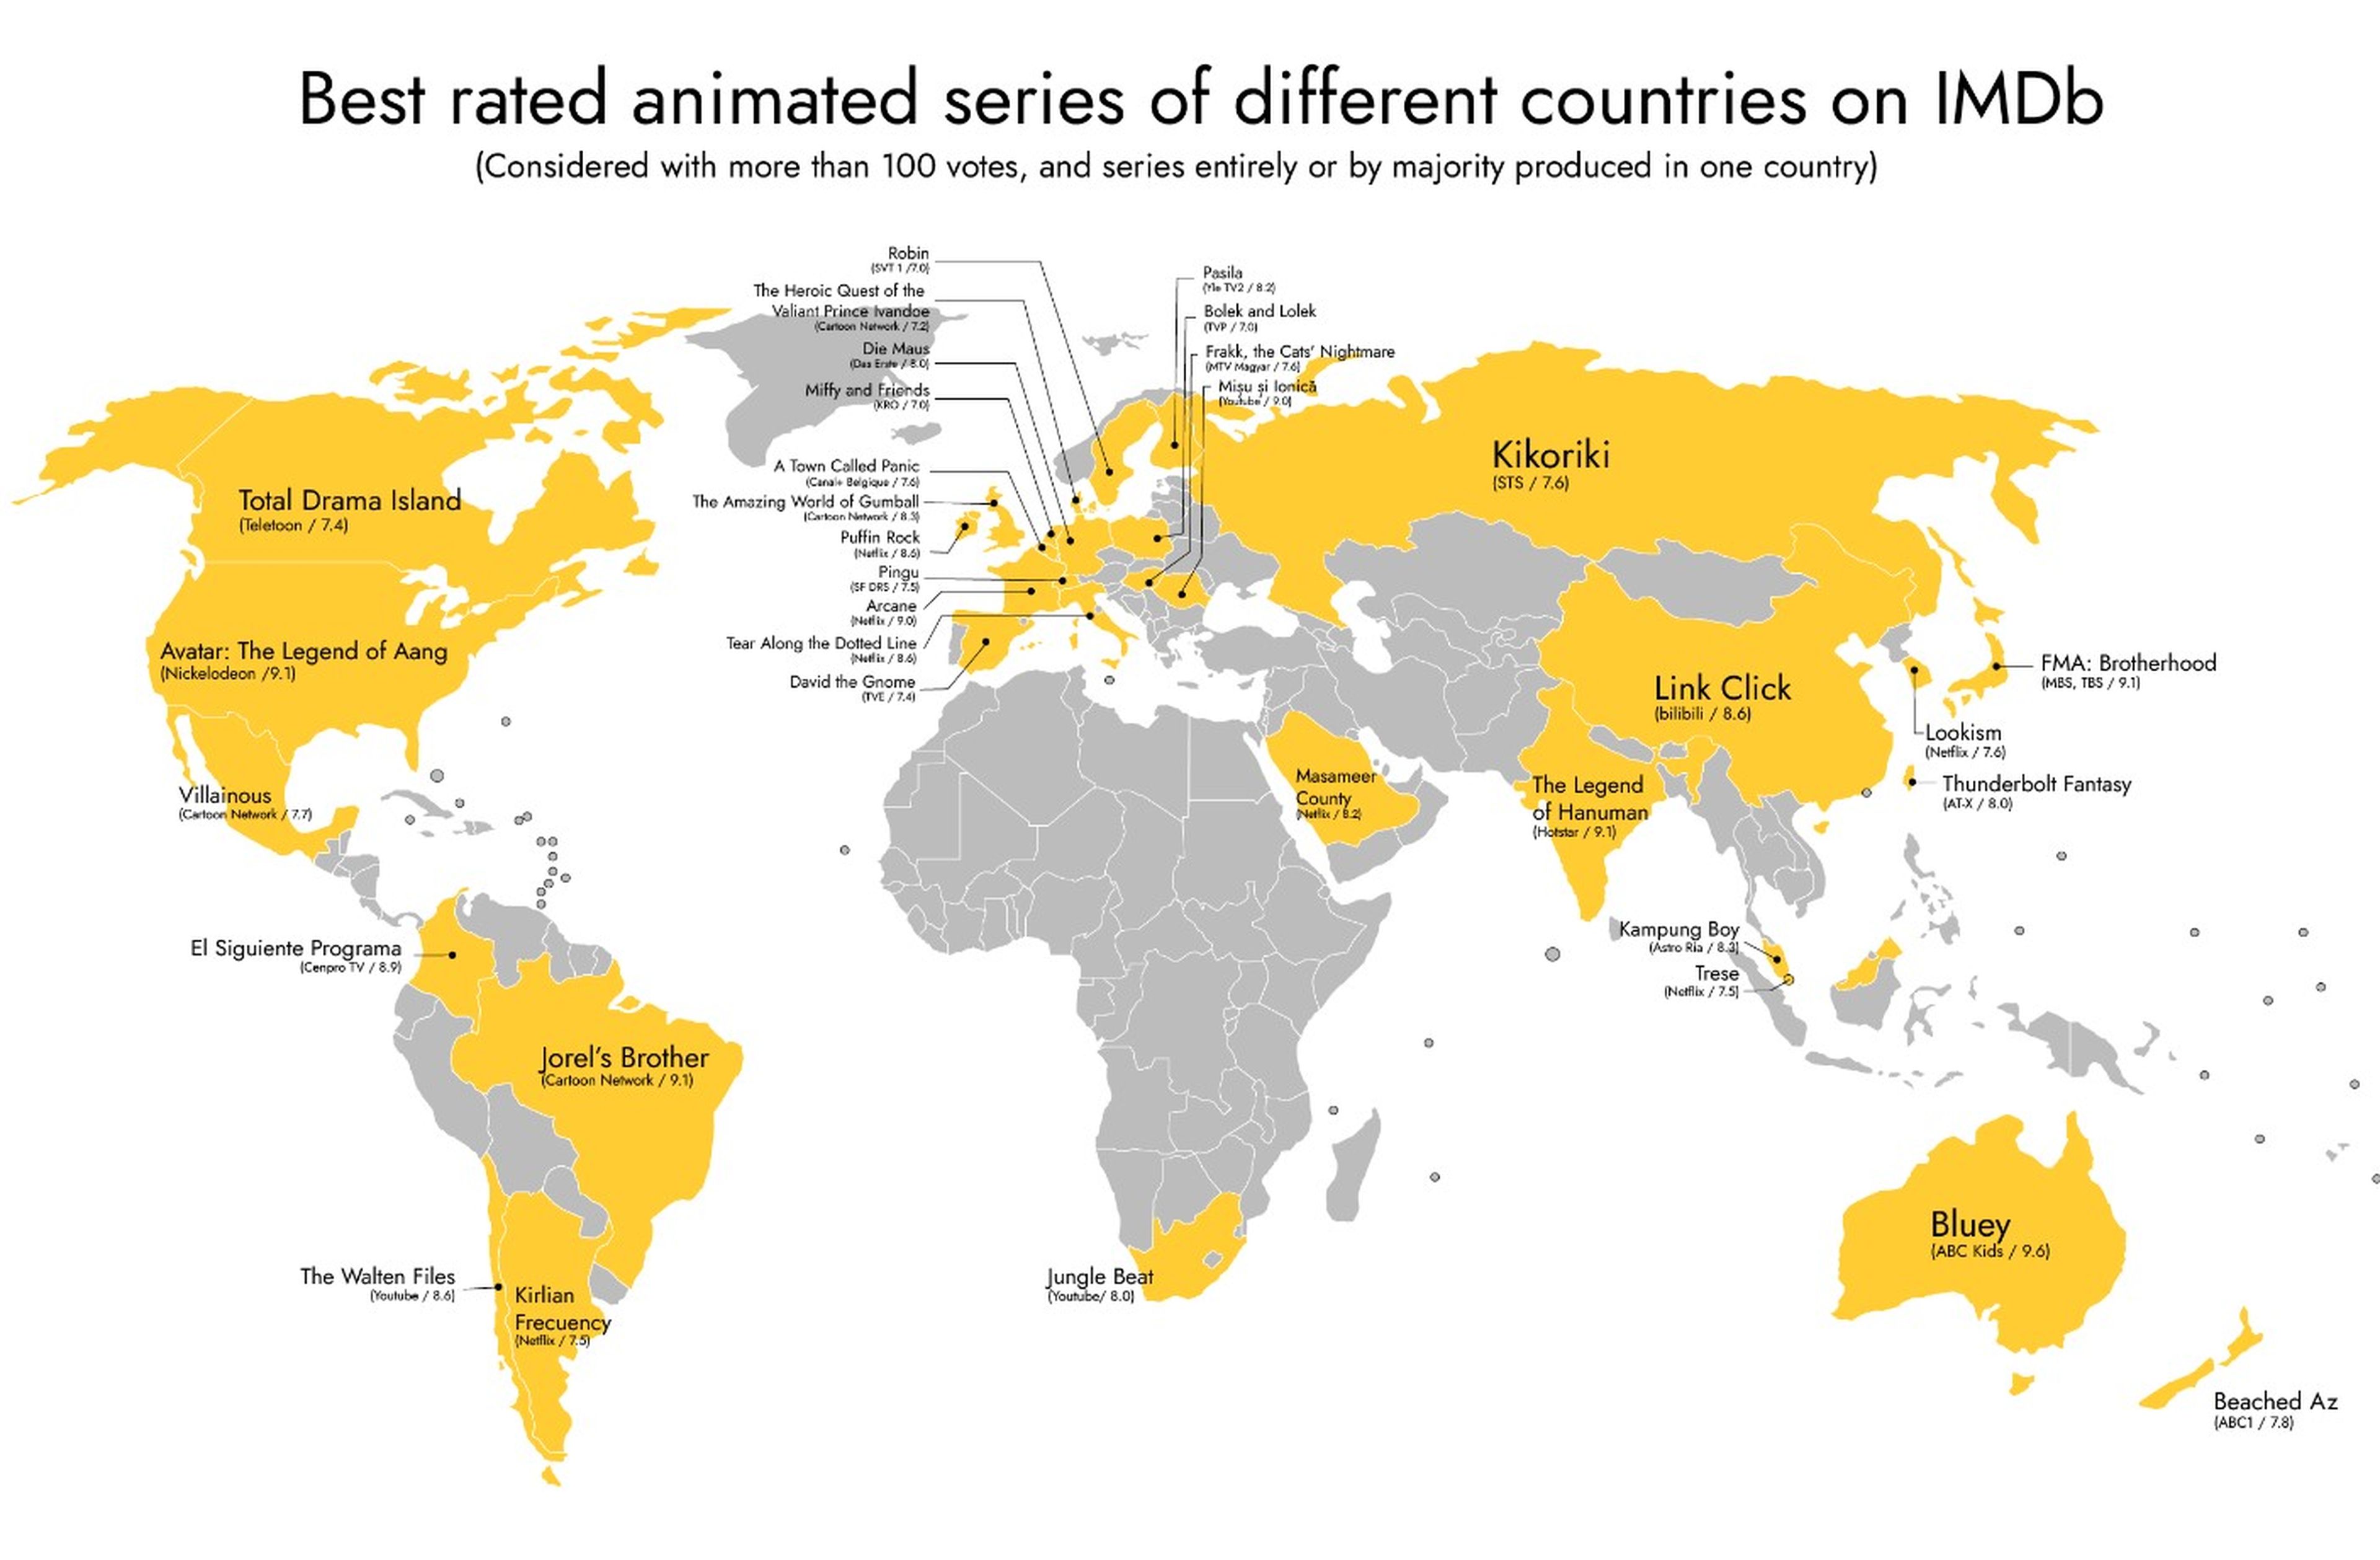 The map of the best rated cartoon series by country on IMDb 